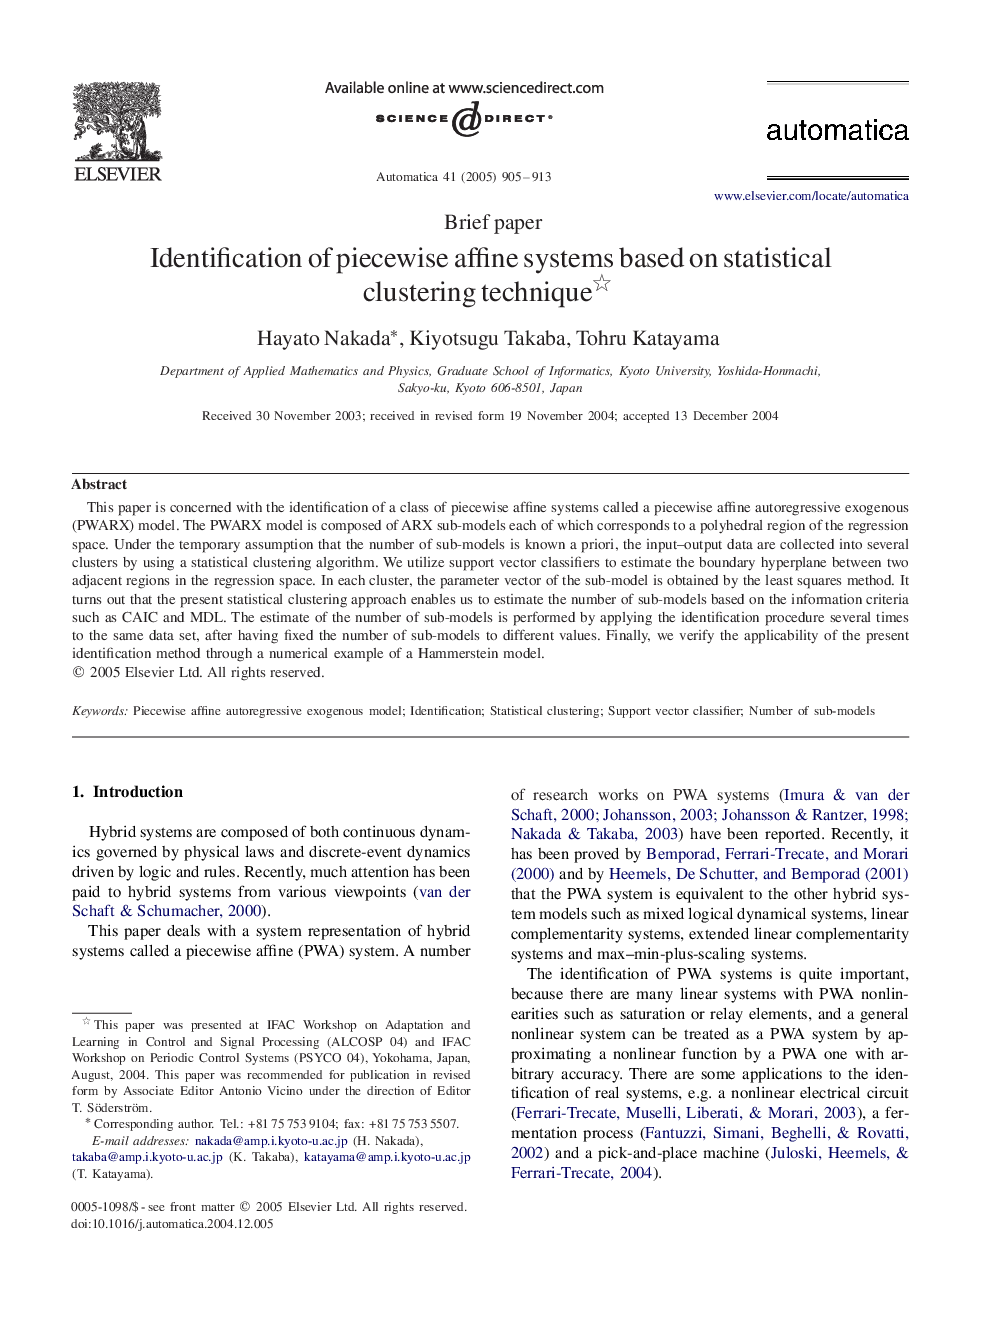 Identification of piecewise affine systems based on statistical clustering technique